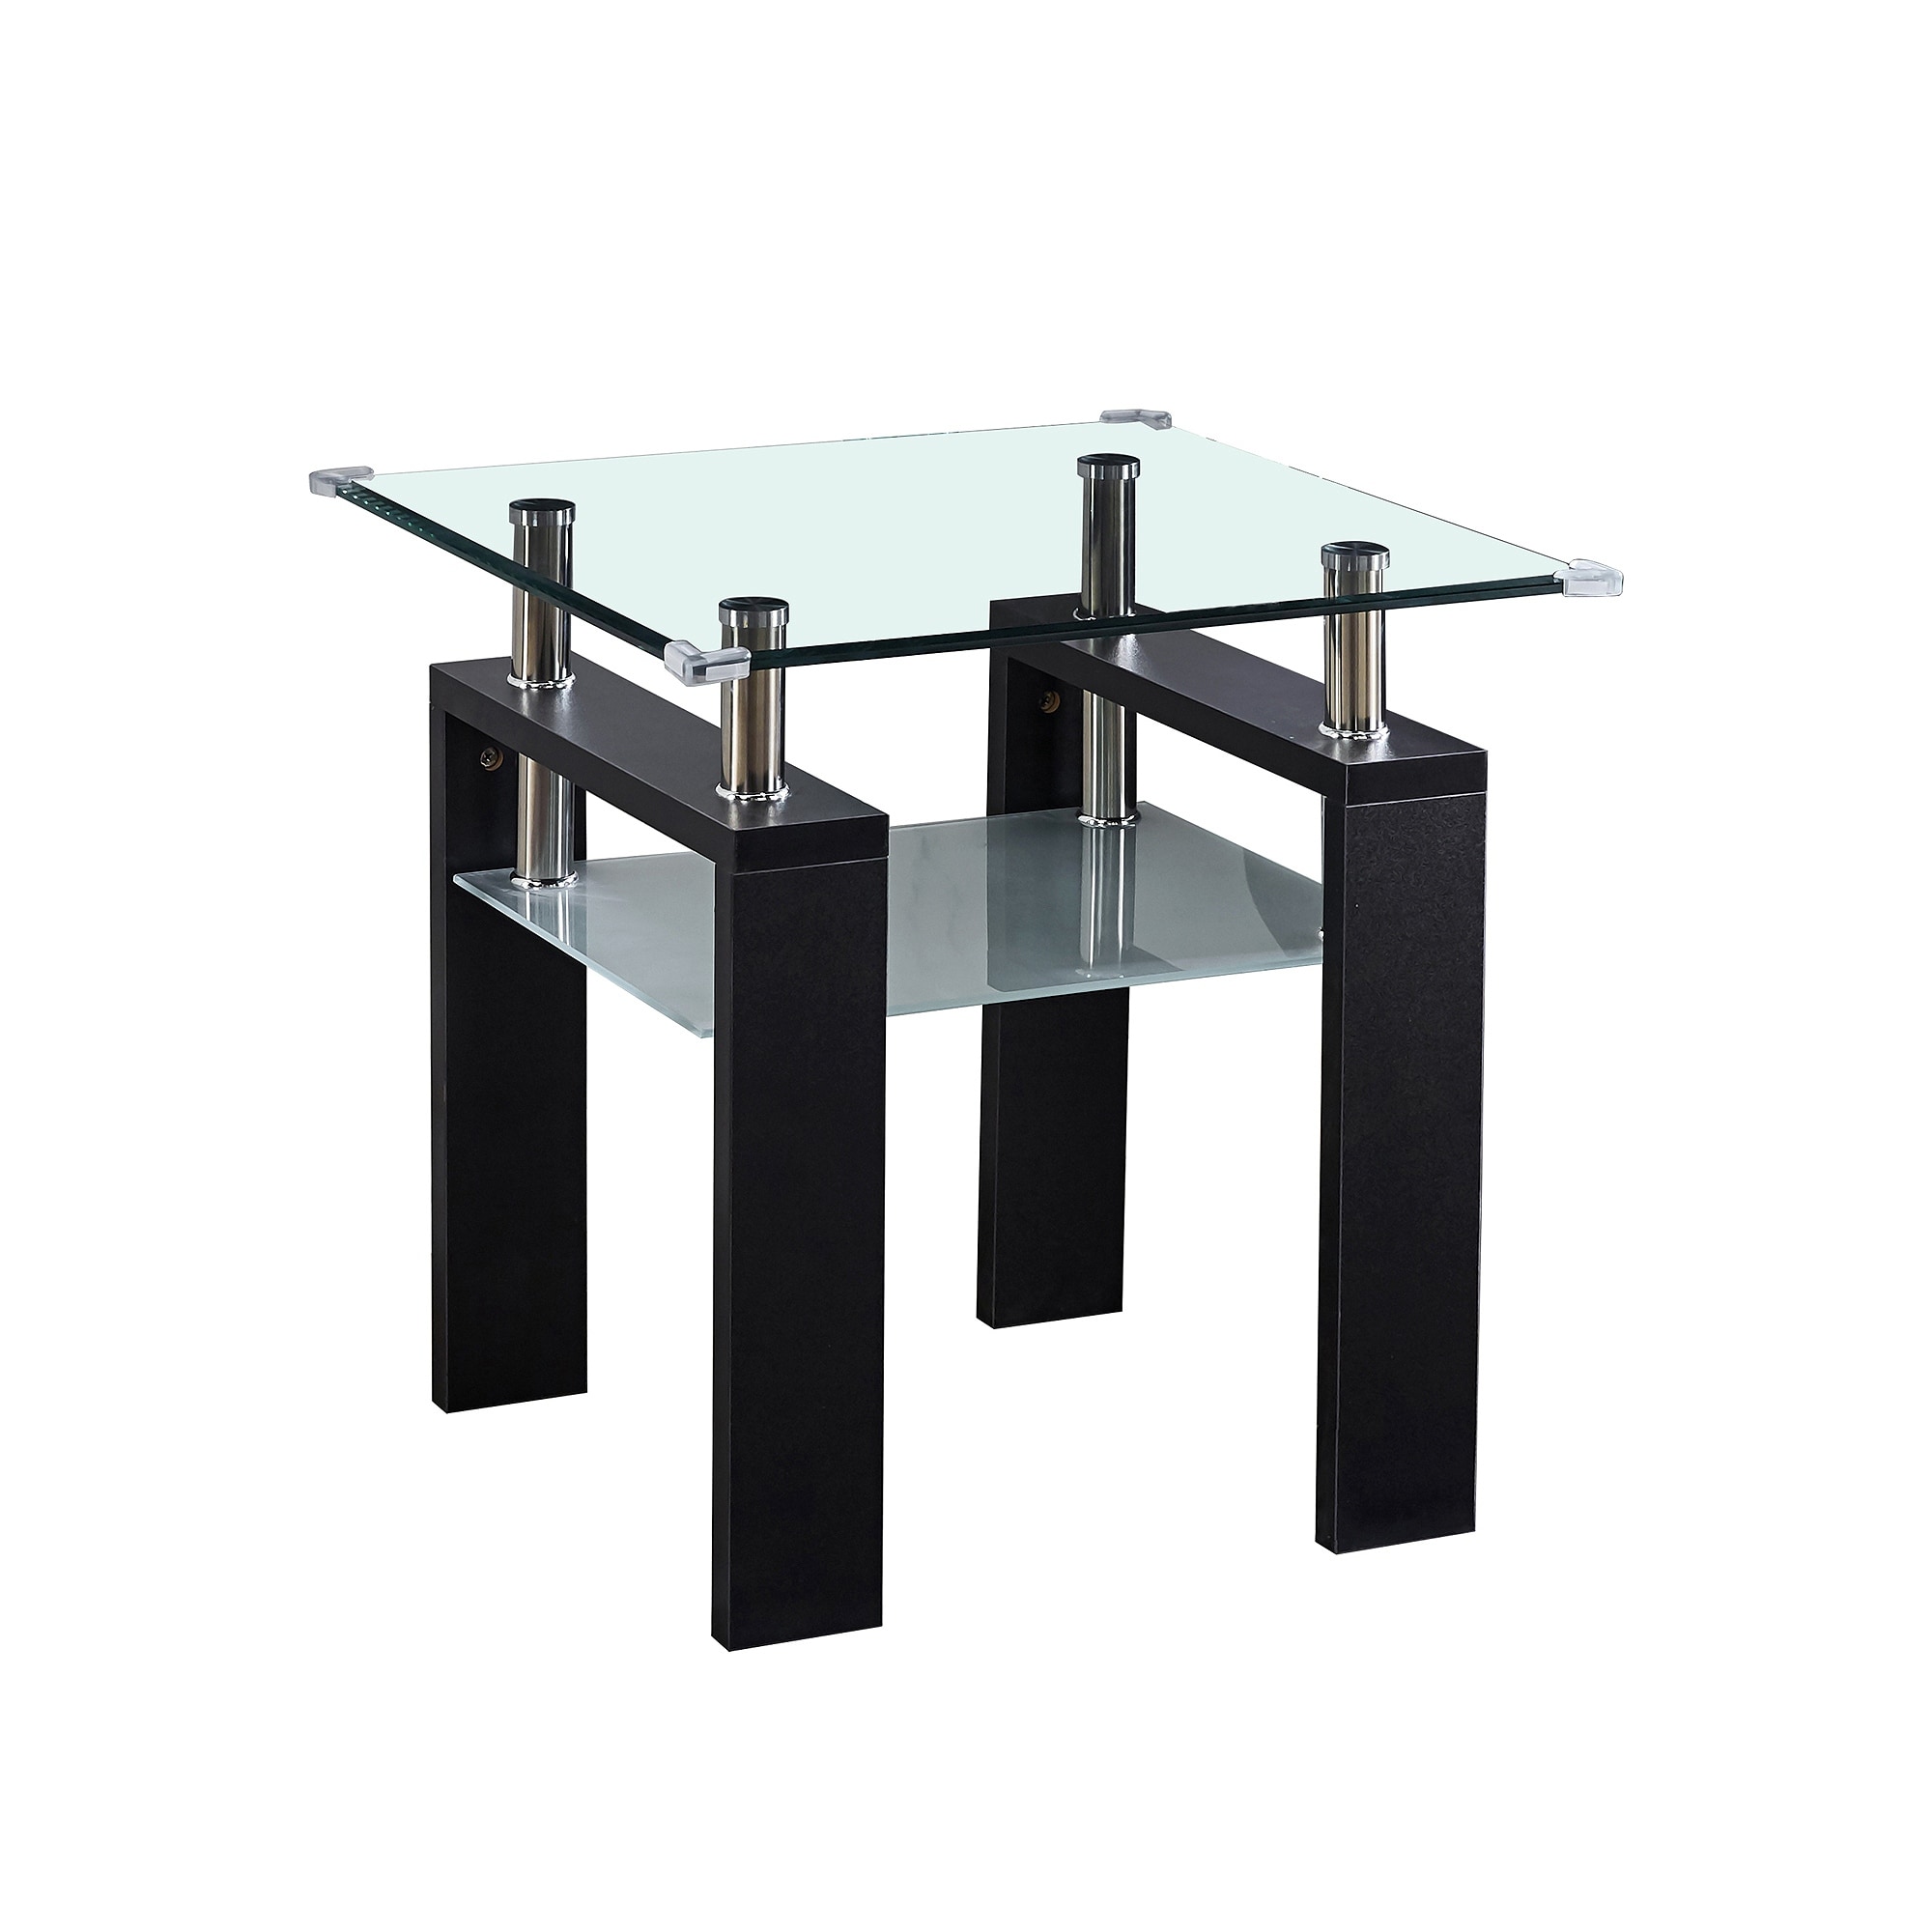 Clear Glass Top Side Table, 24 inchx24 inchx24 inch End Table, Modern Design For Home